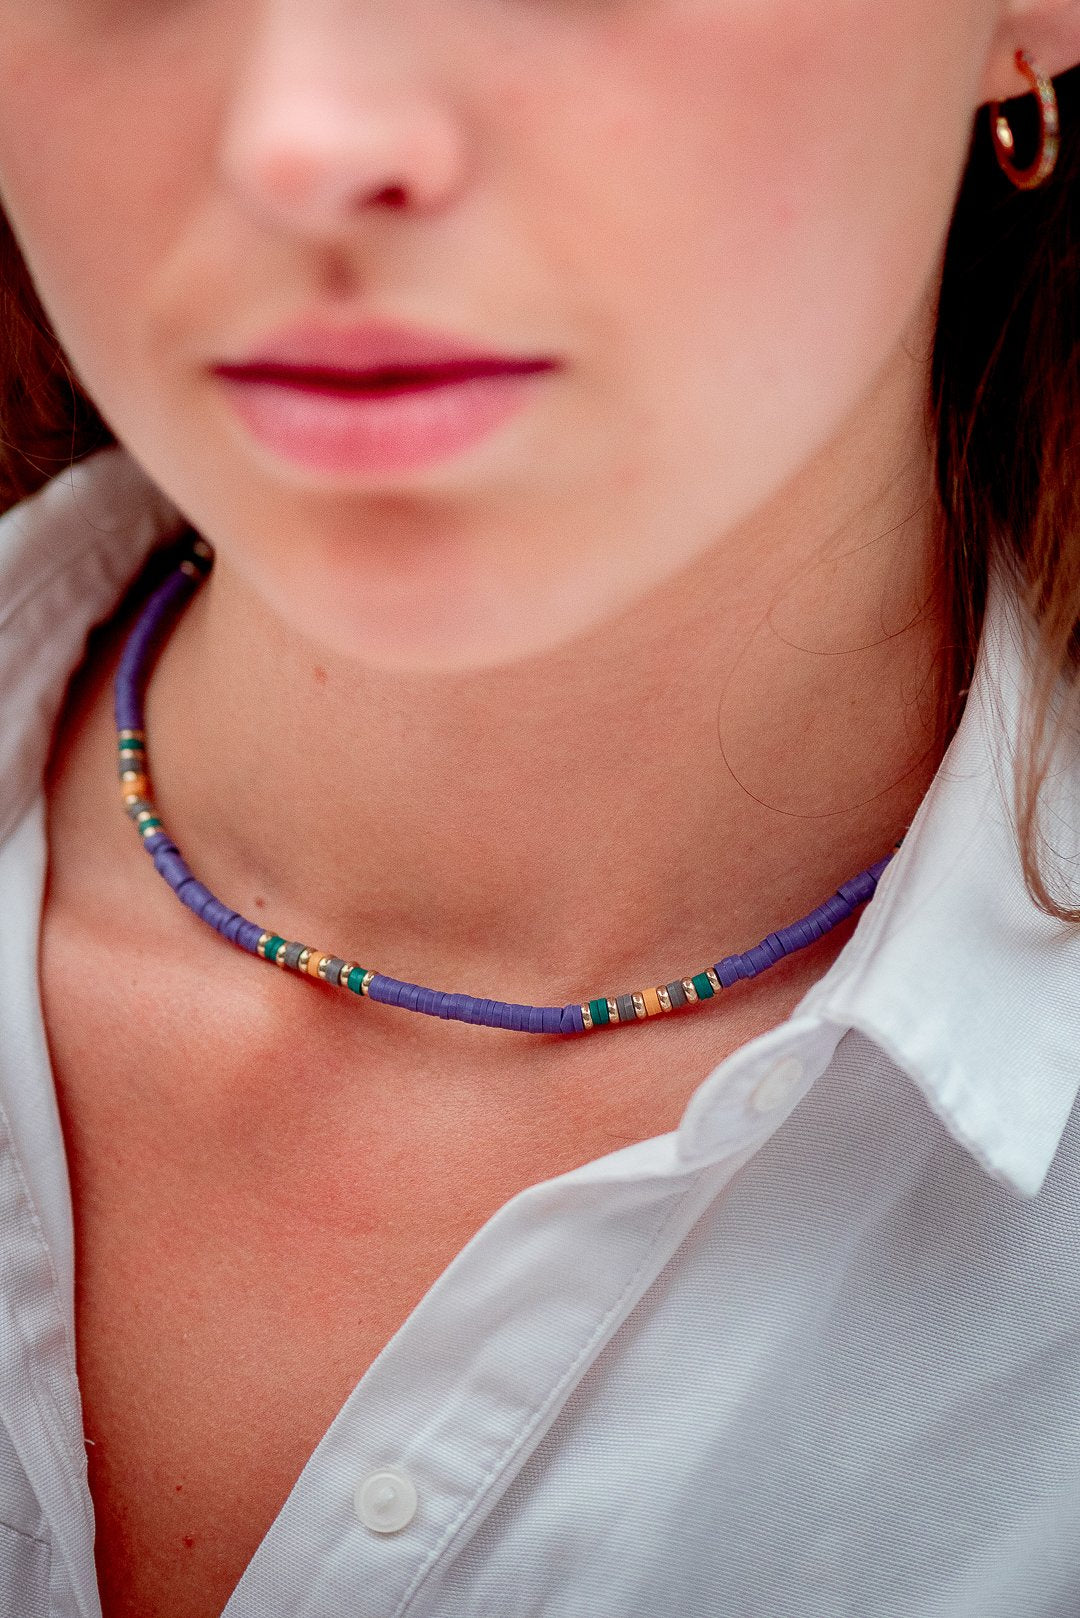 Classy Sassy Colourful Choker Necklace - necklaces, Necklaces Colored, Sale - Classy Sassy Colourful Choker Necklace - ANNABO Online Store